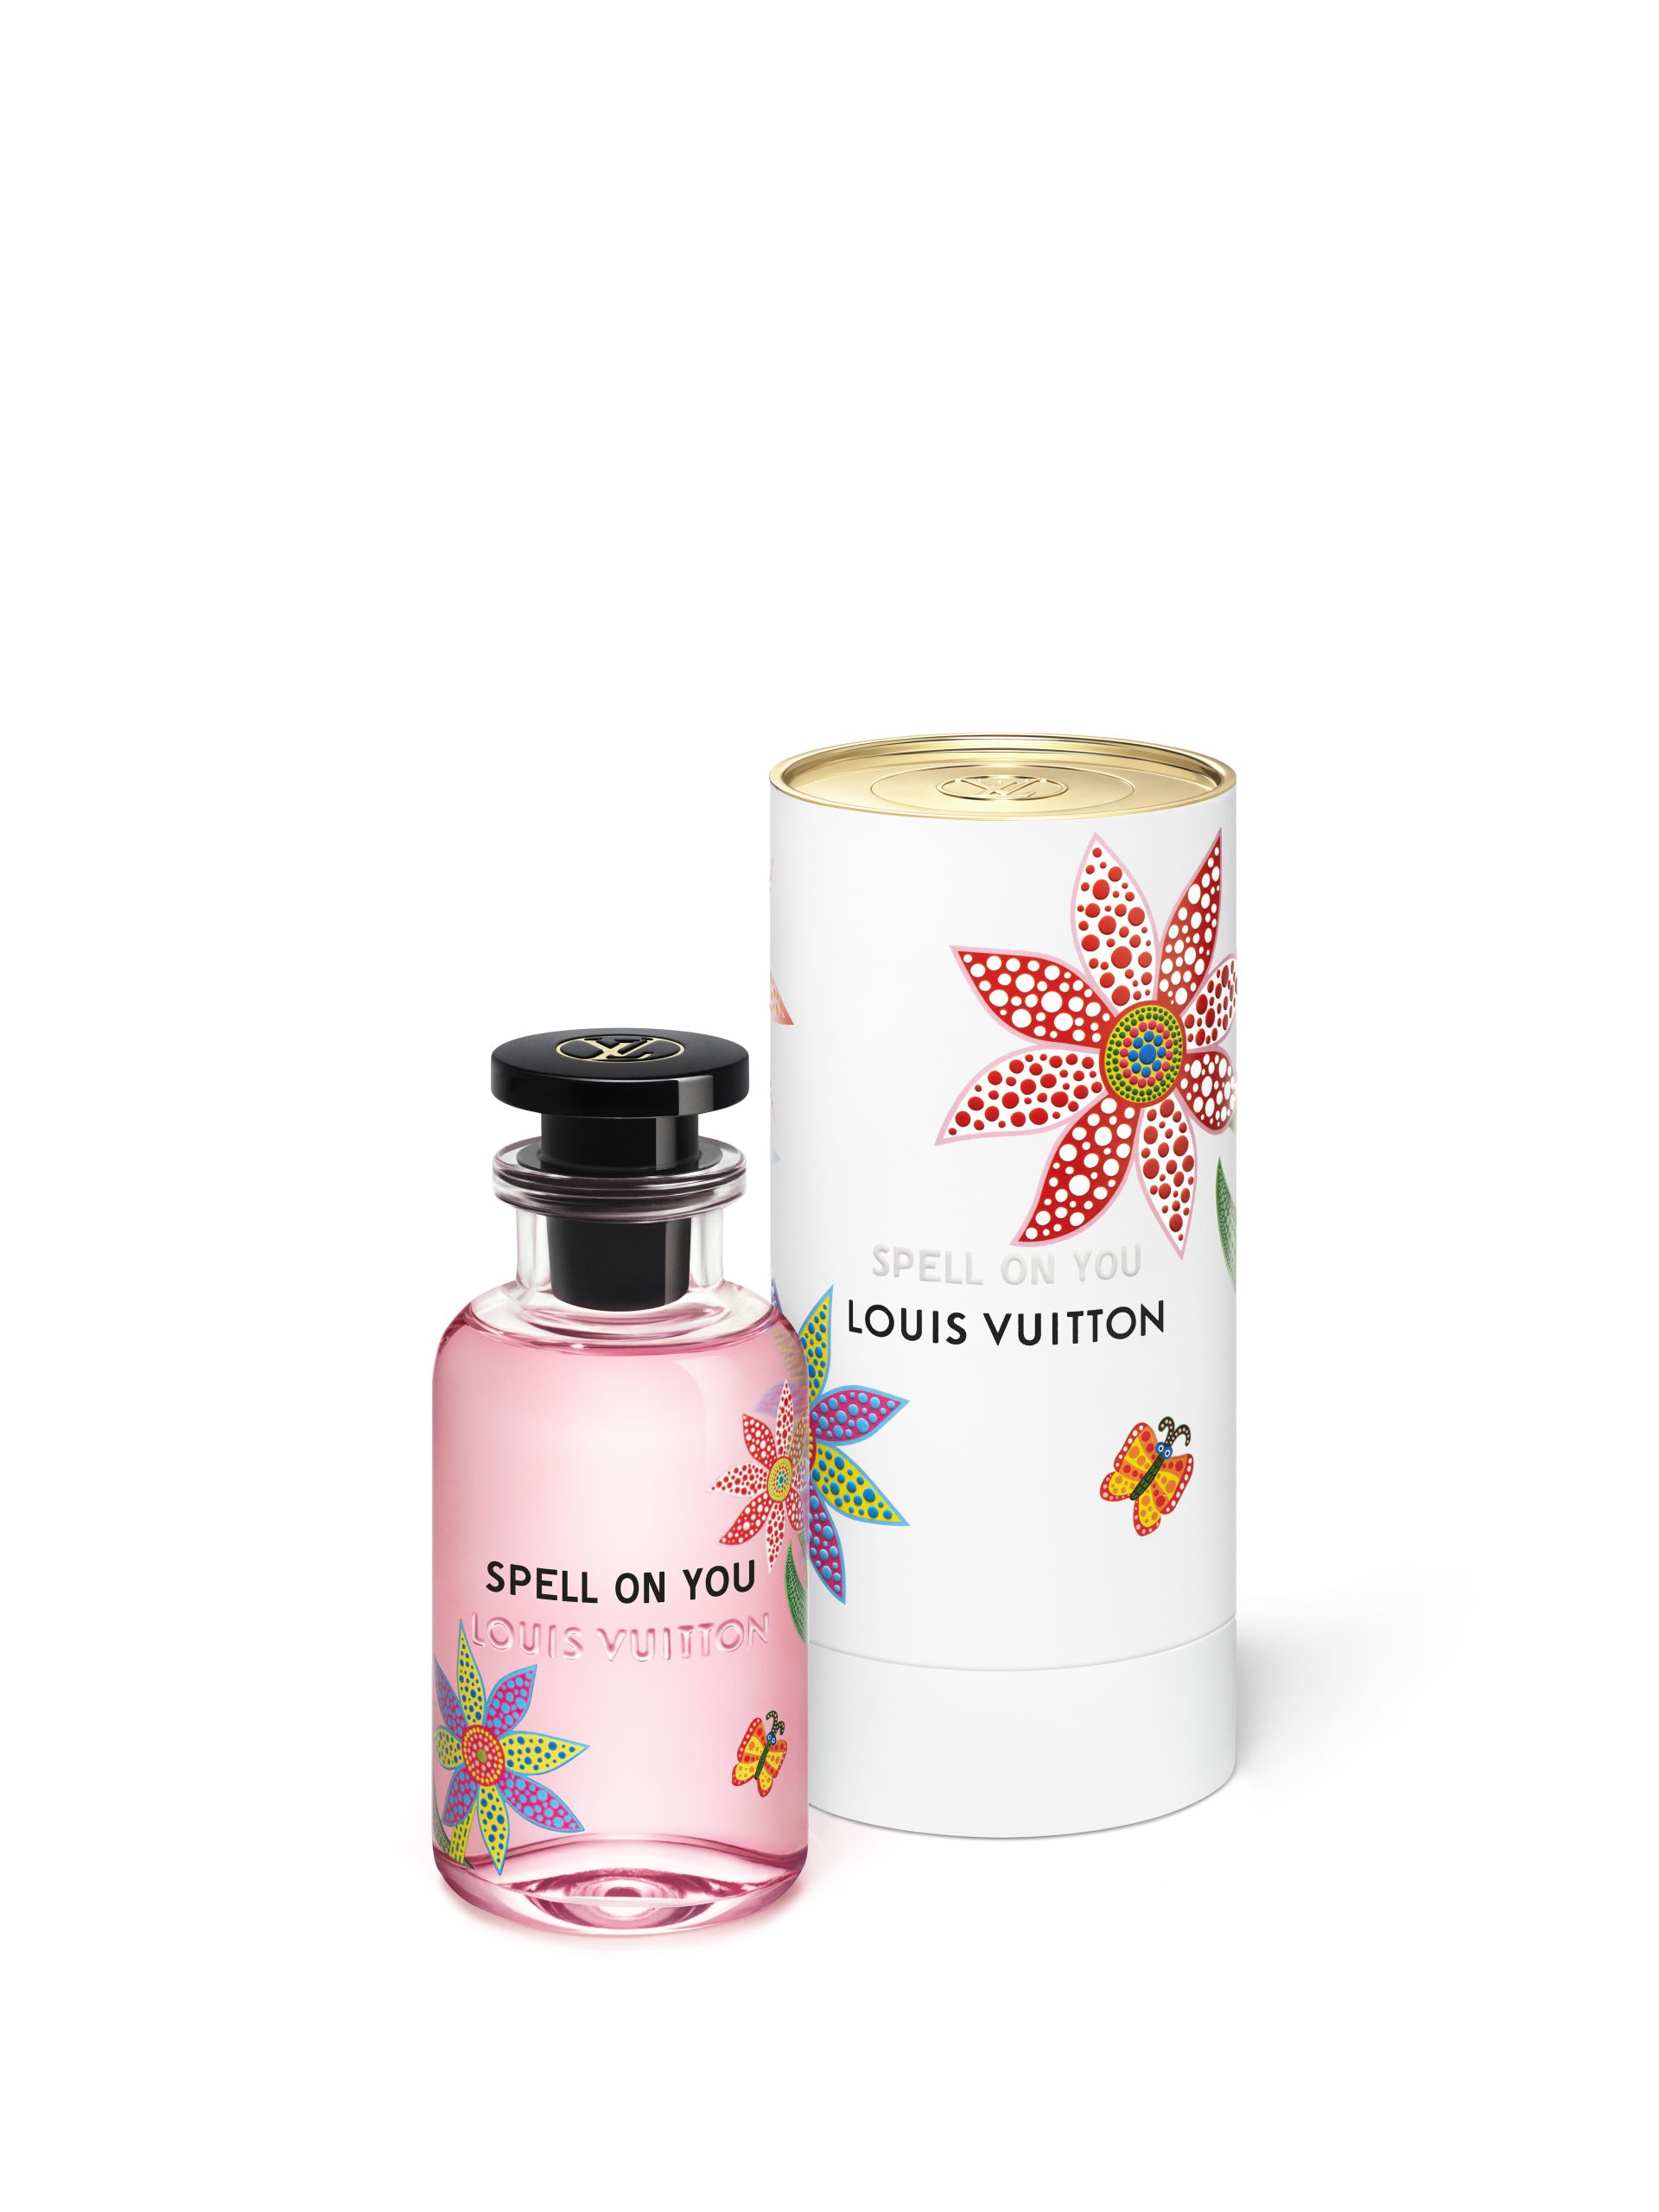 LOUIS VUITTON 香水 SPELL ON YOU - 香水